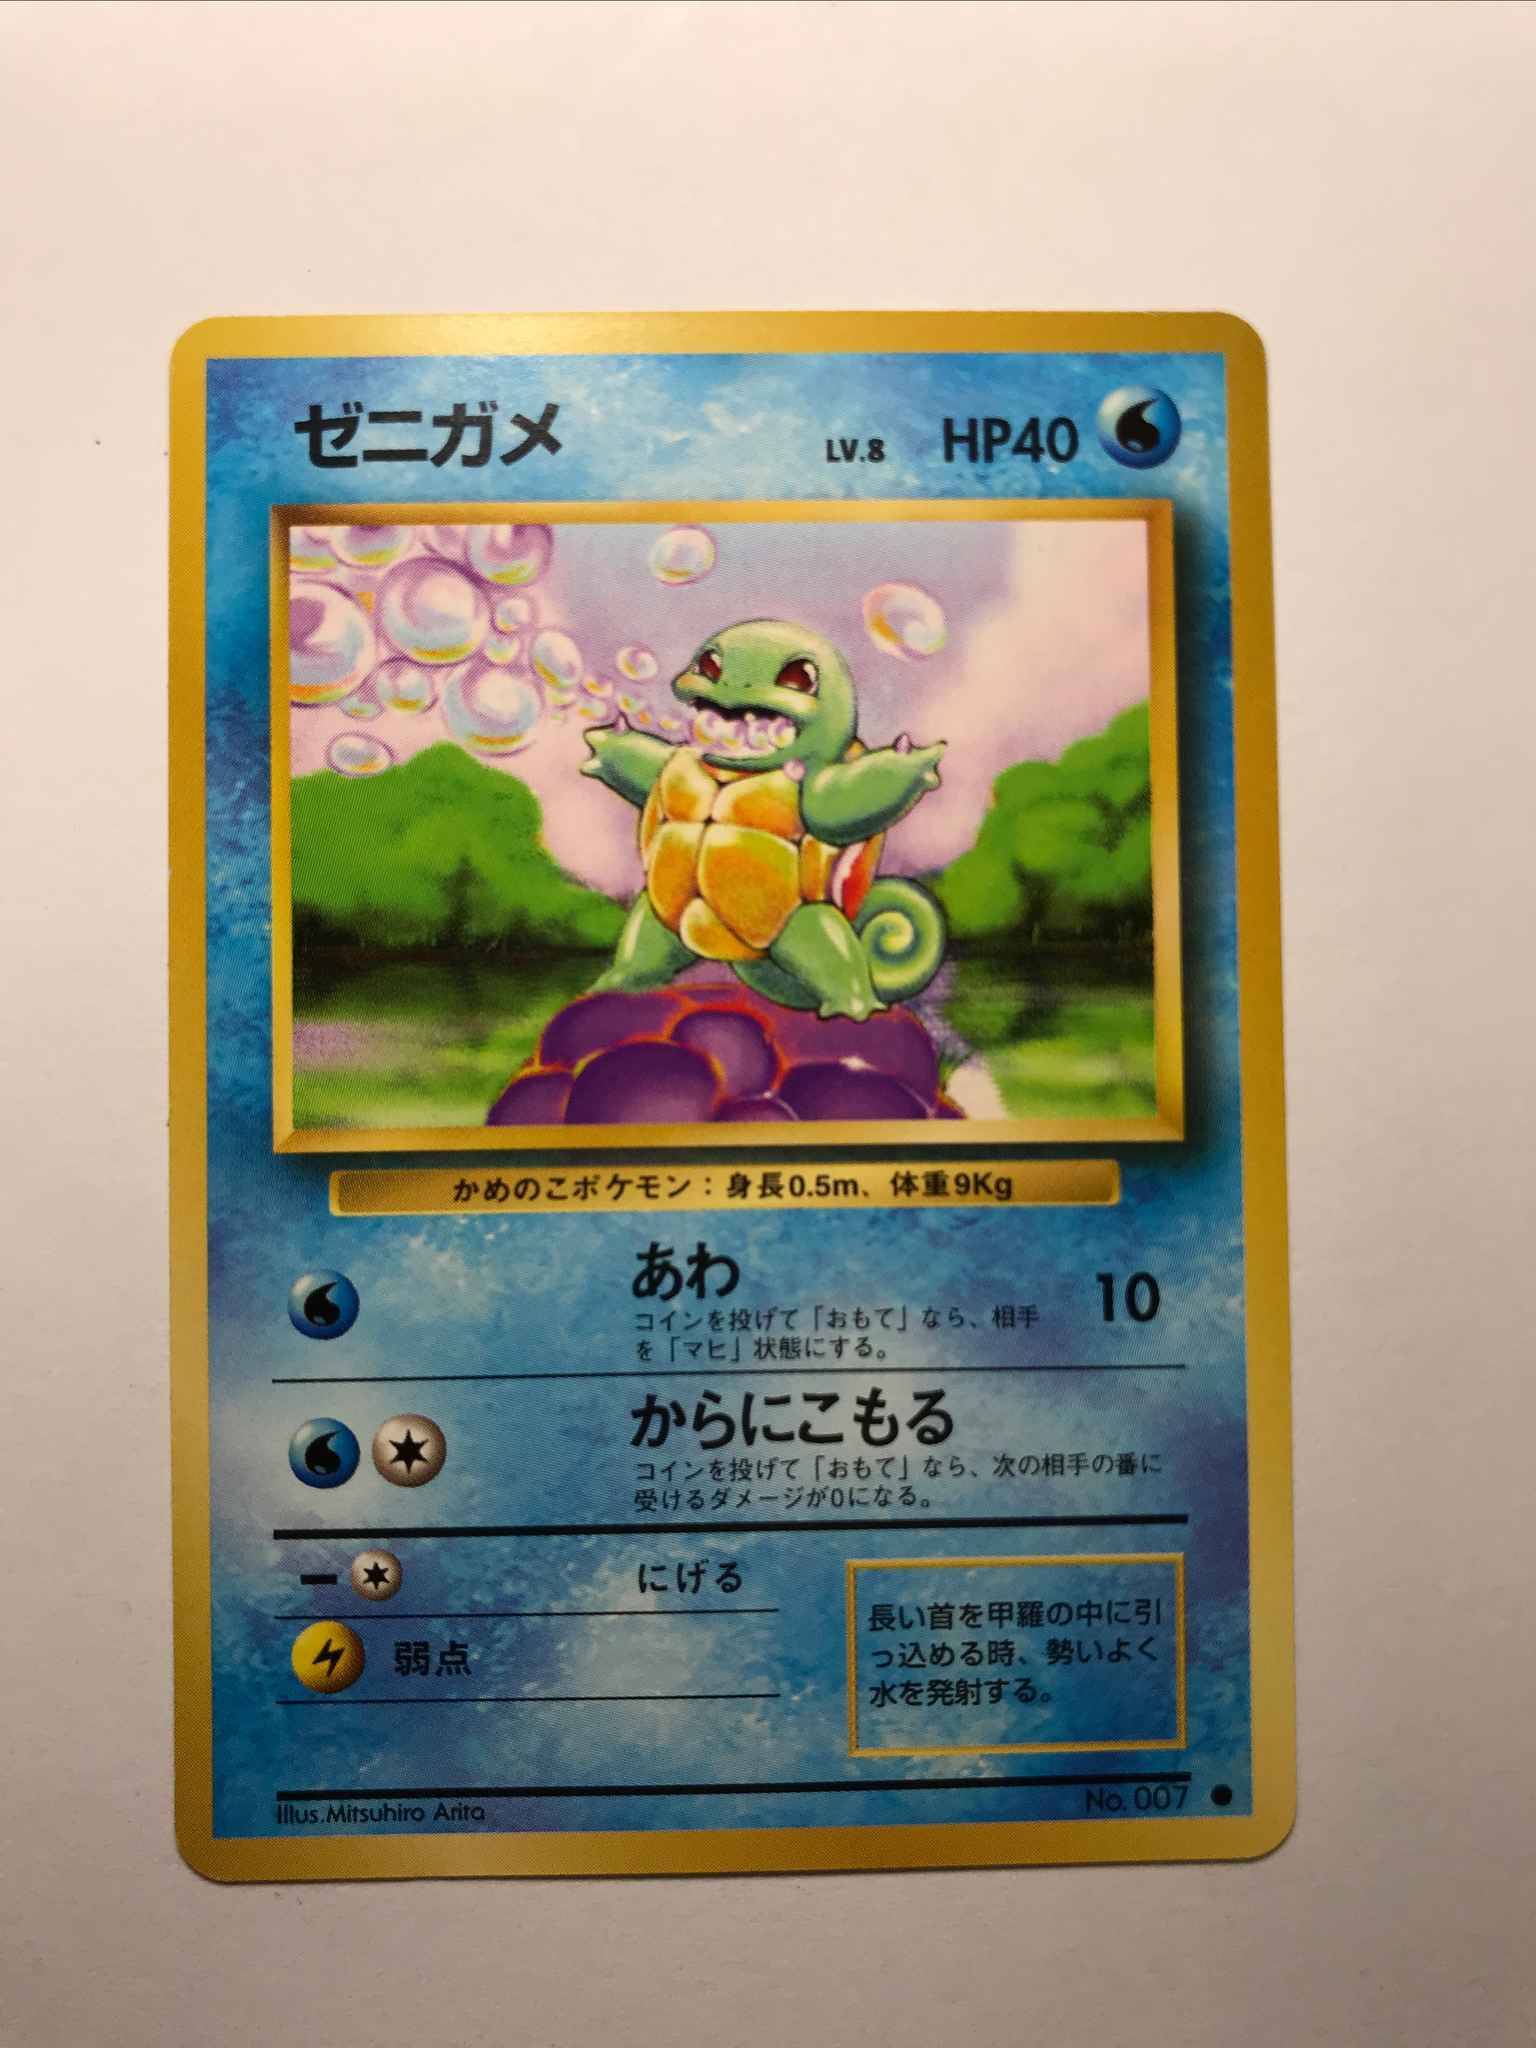 Japanese Squirtle : Squirtle - Base Set - Pokemon